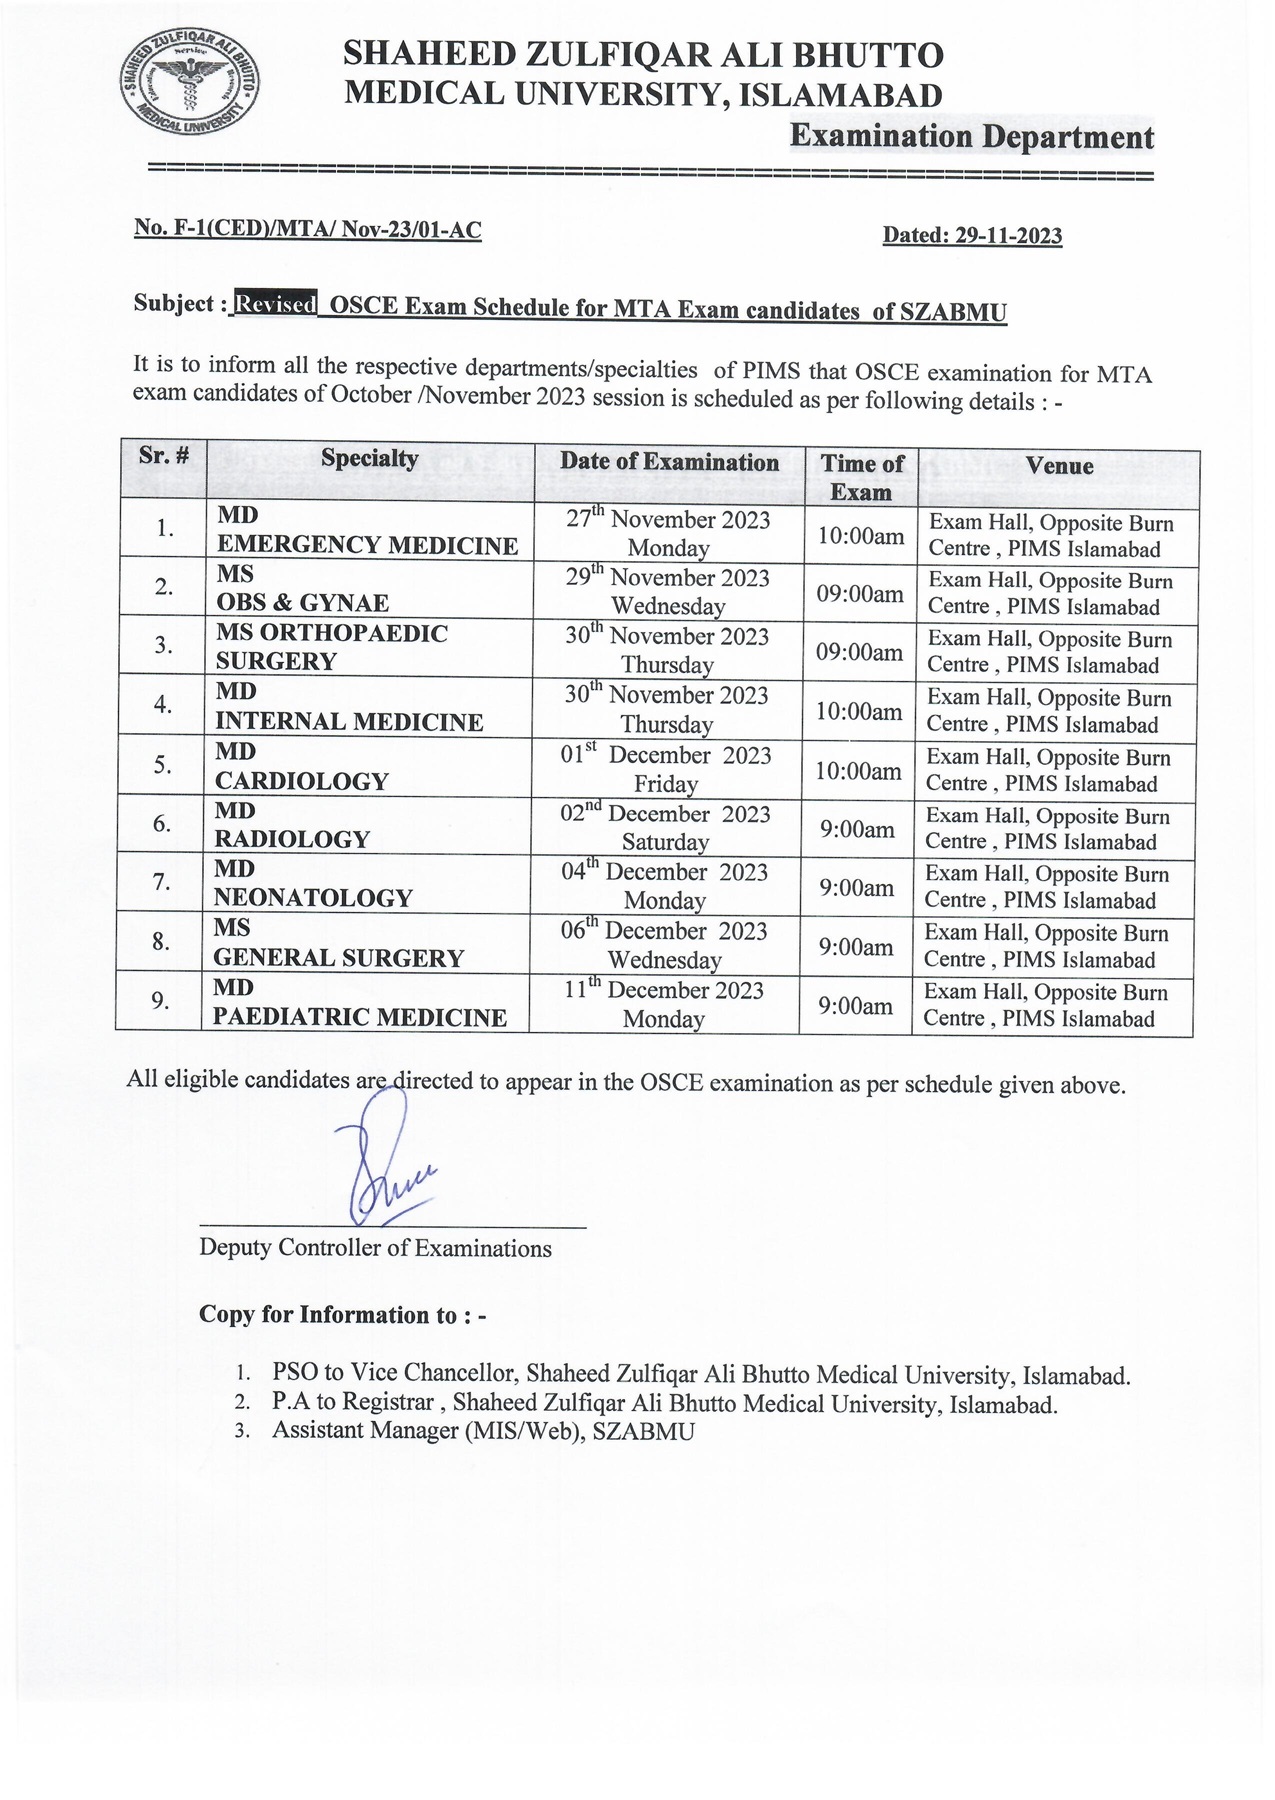 Revised - OSCE EXAM schedule of MTA Candidates Oct/Nov 2023 Session